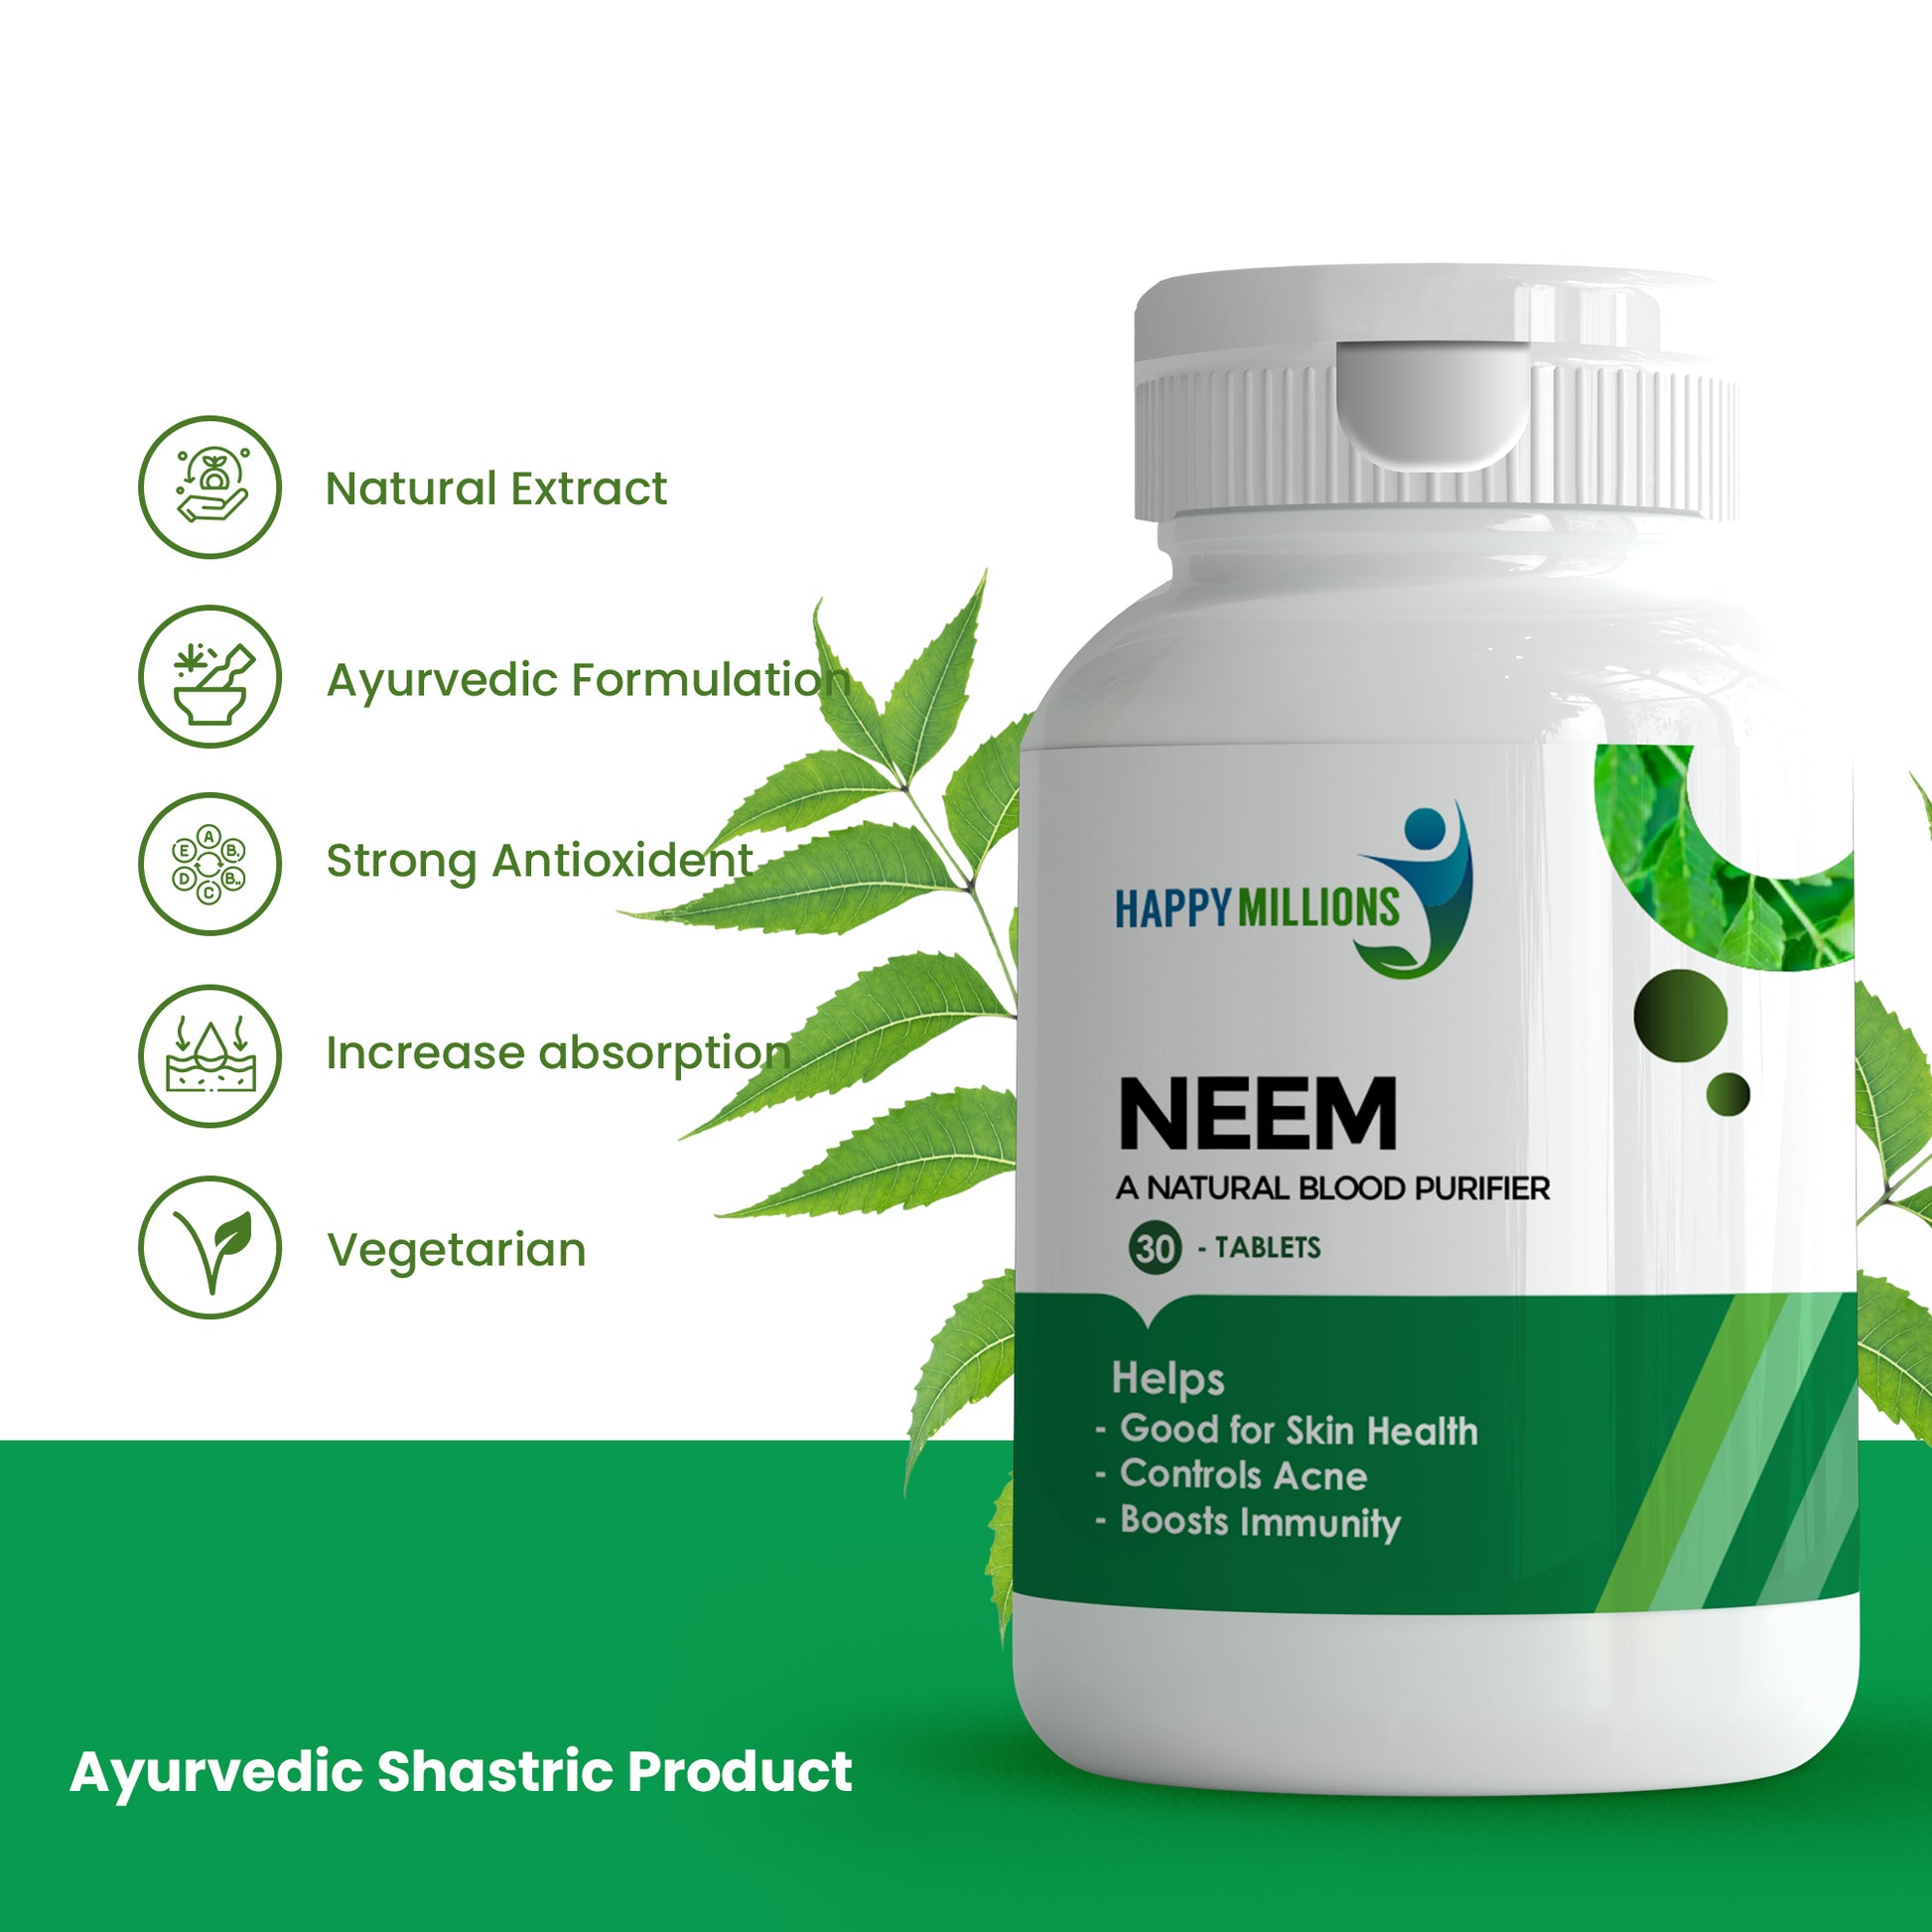 Discover Purified Skin and Enhanced Immunity with Happy Millions Neem The Ayurvedic Powerhouse.